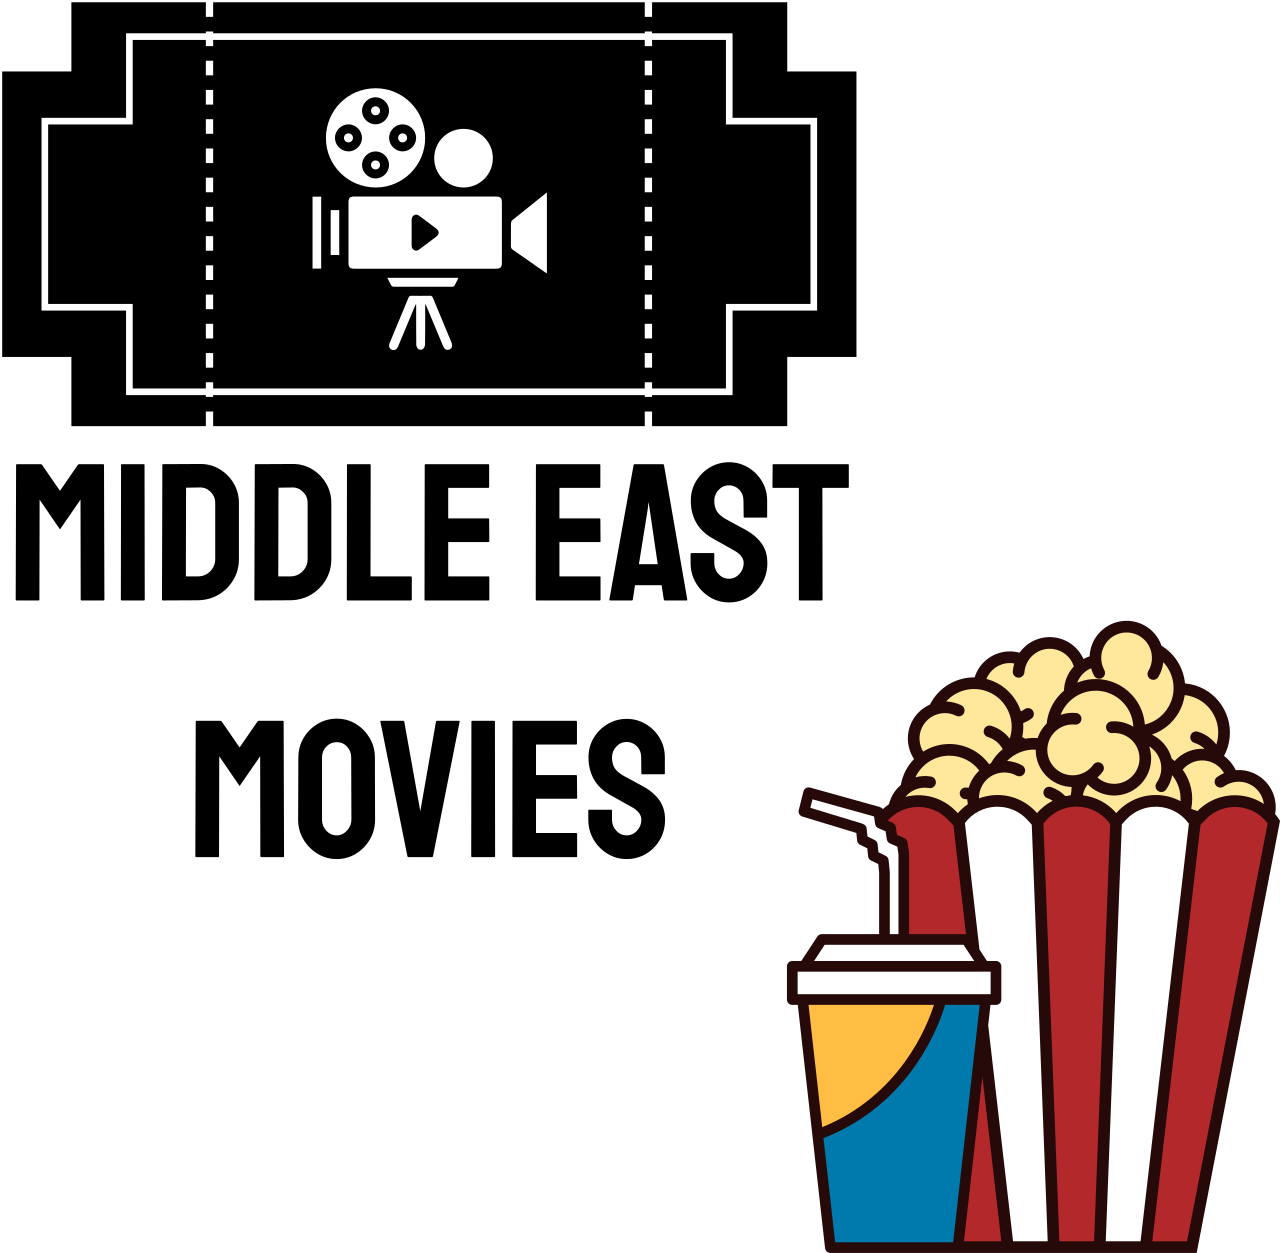 Middle East
Movies's logo